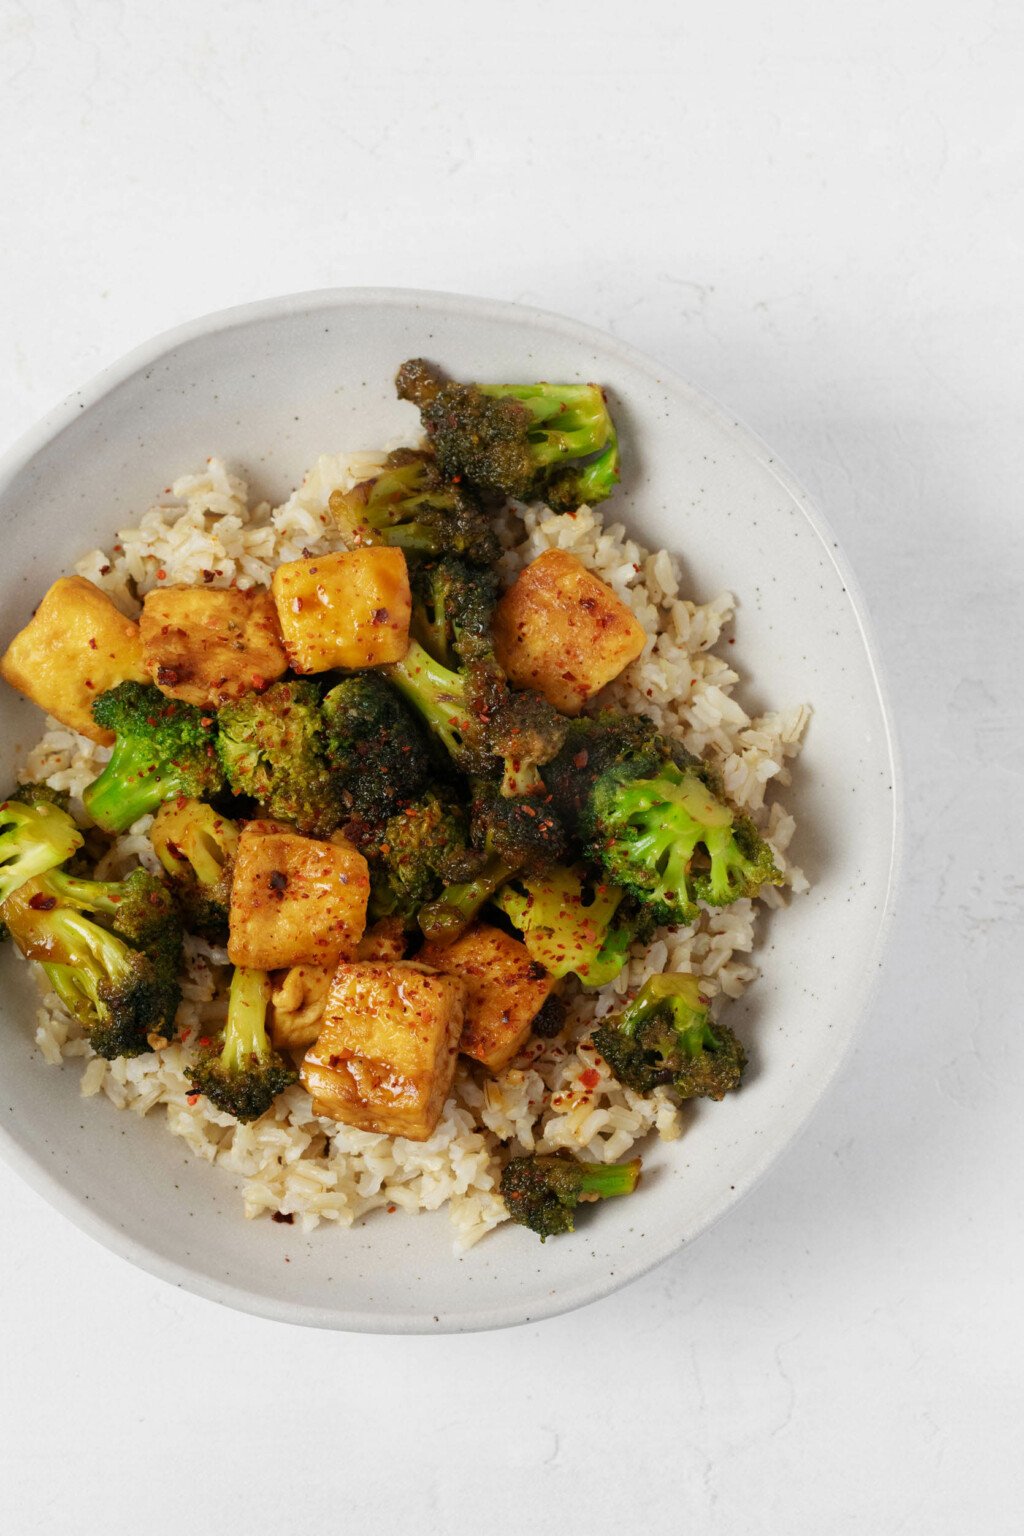 An overhead image of a broccoli tofu stir fry, which has been served over a bed of brown rice.